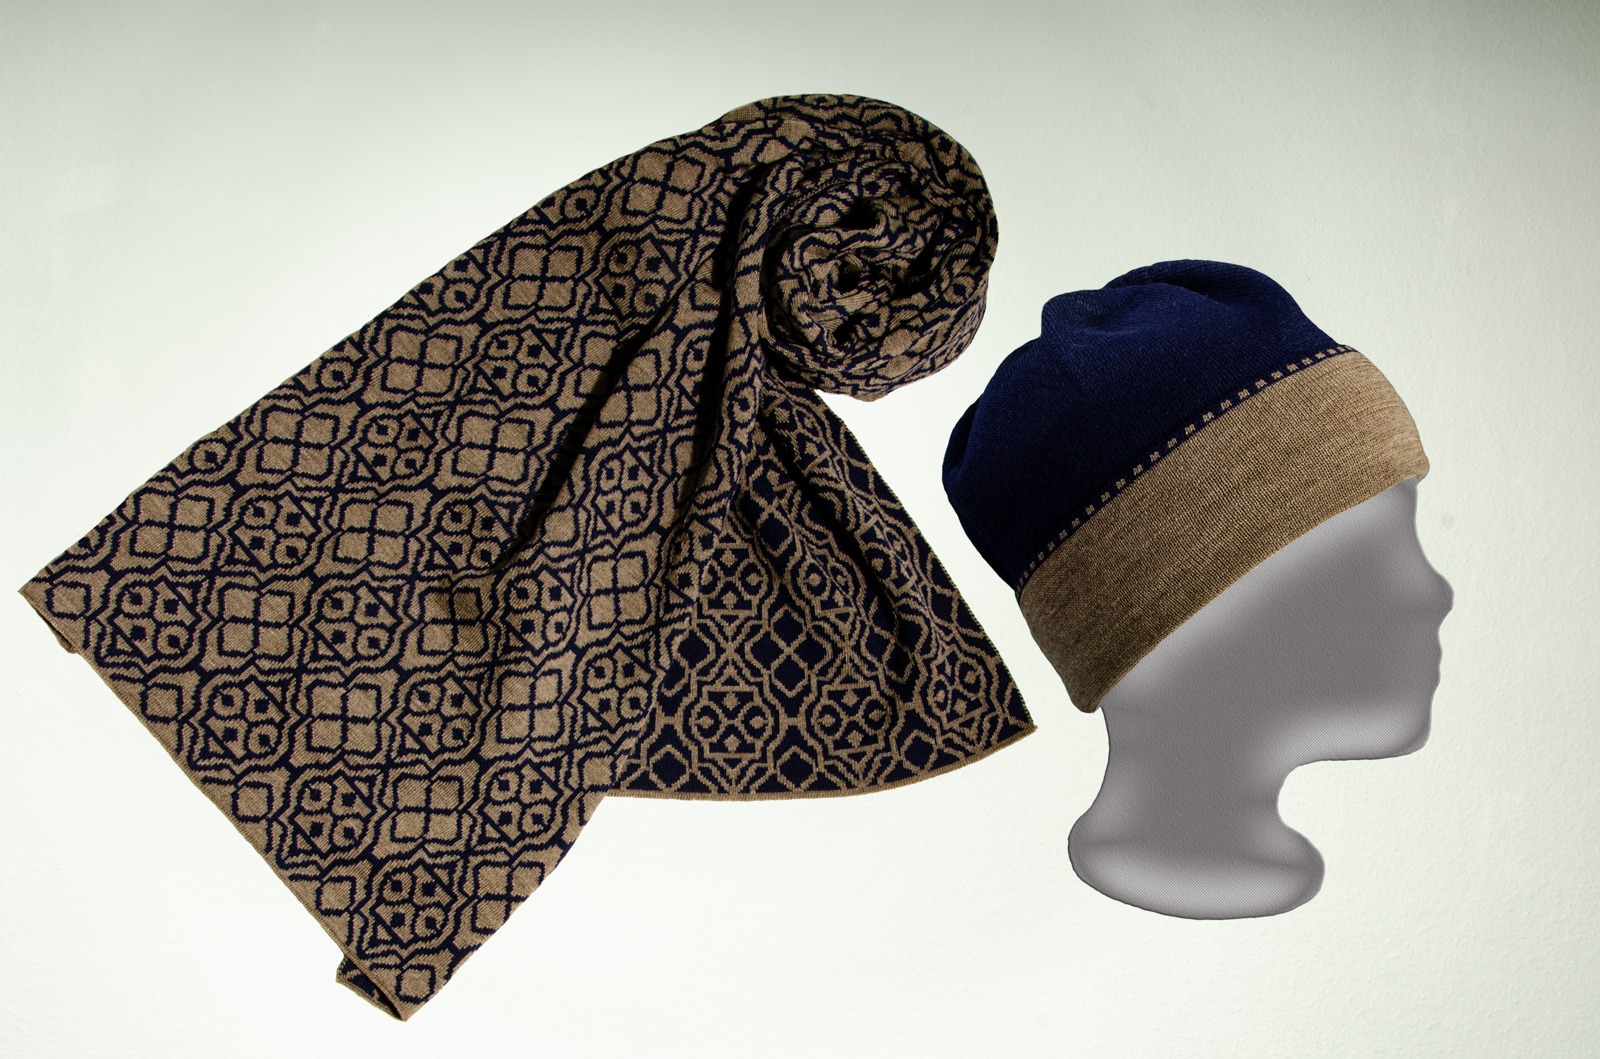 Merino scarf and net hat in taupe and dark blue